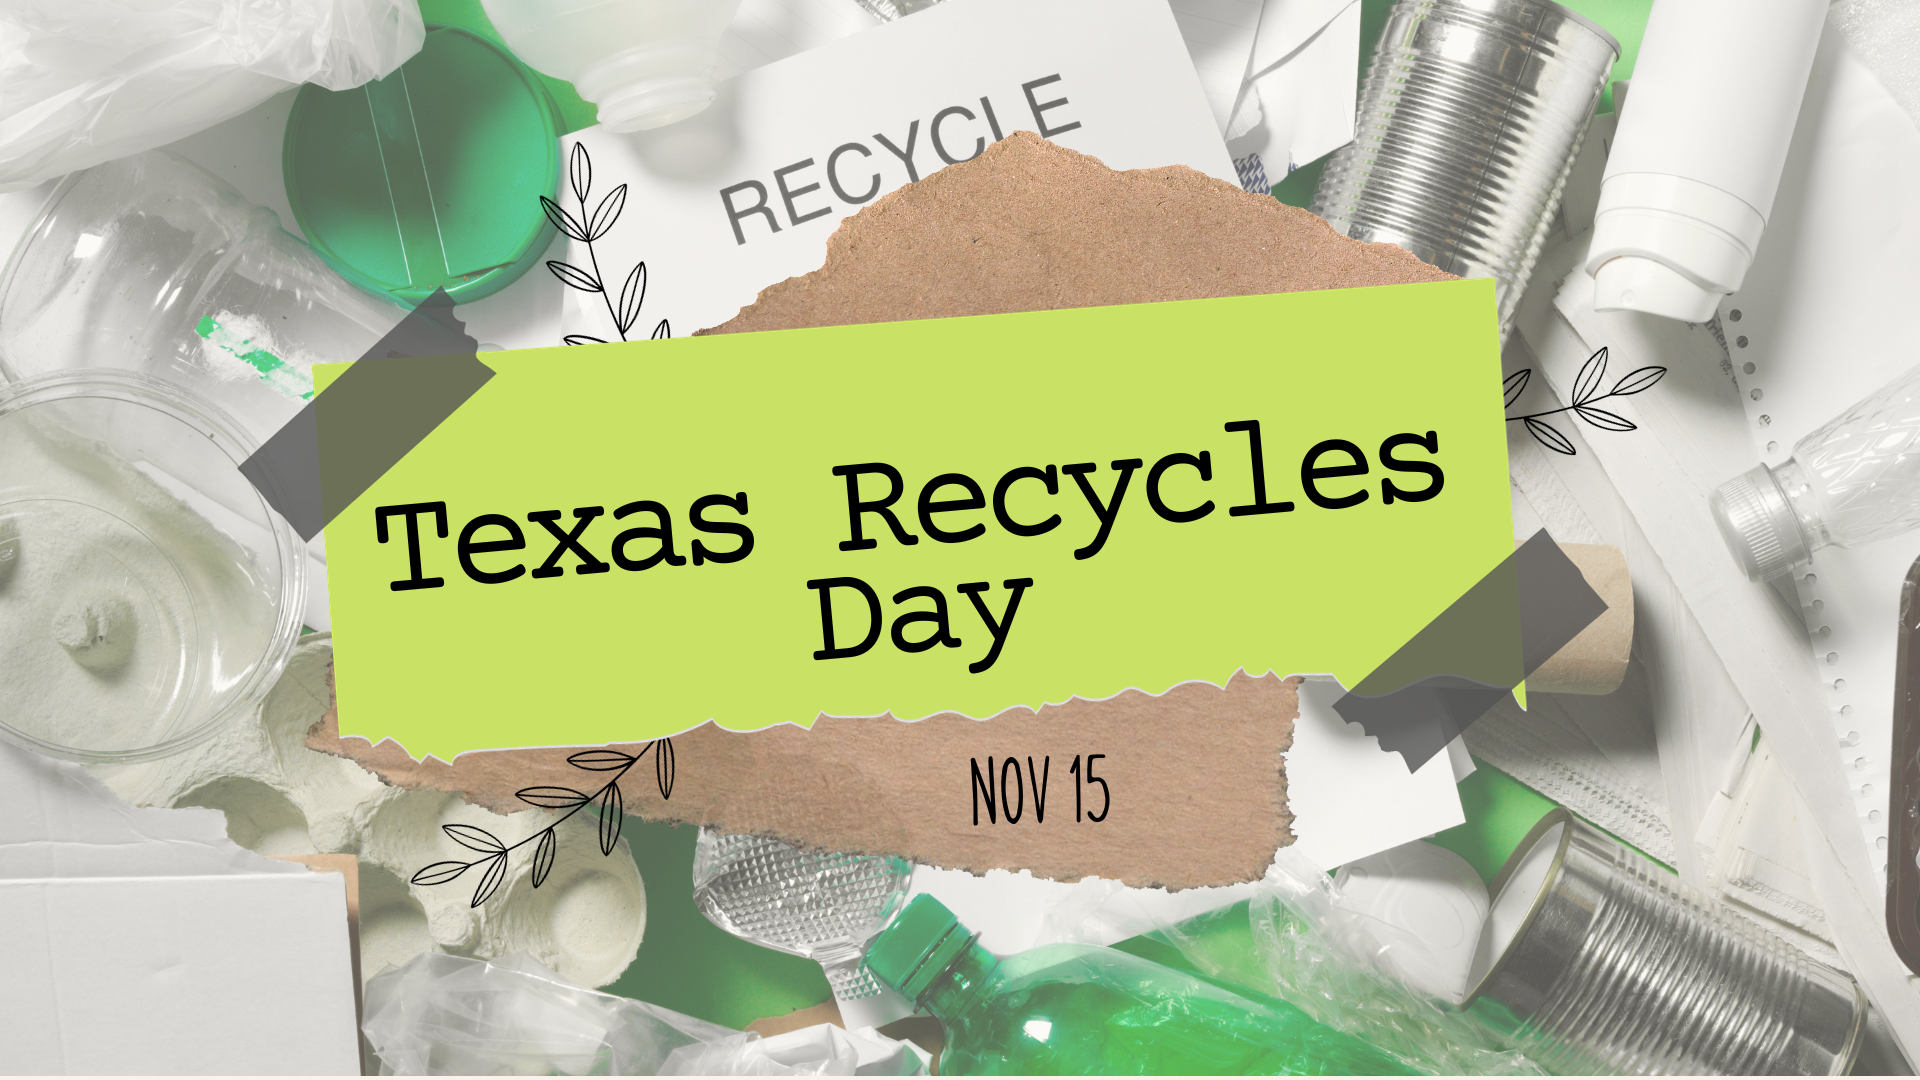 Texas Recycles Day